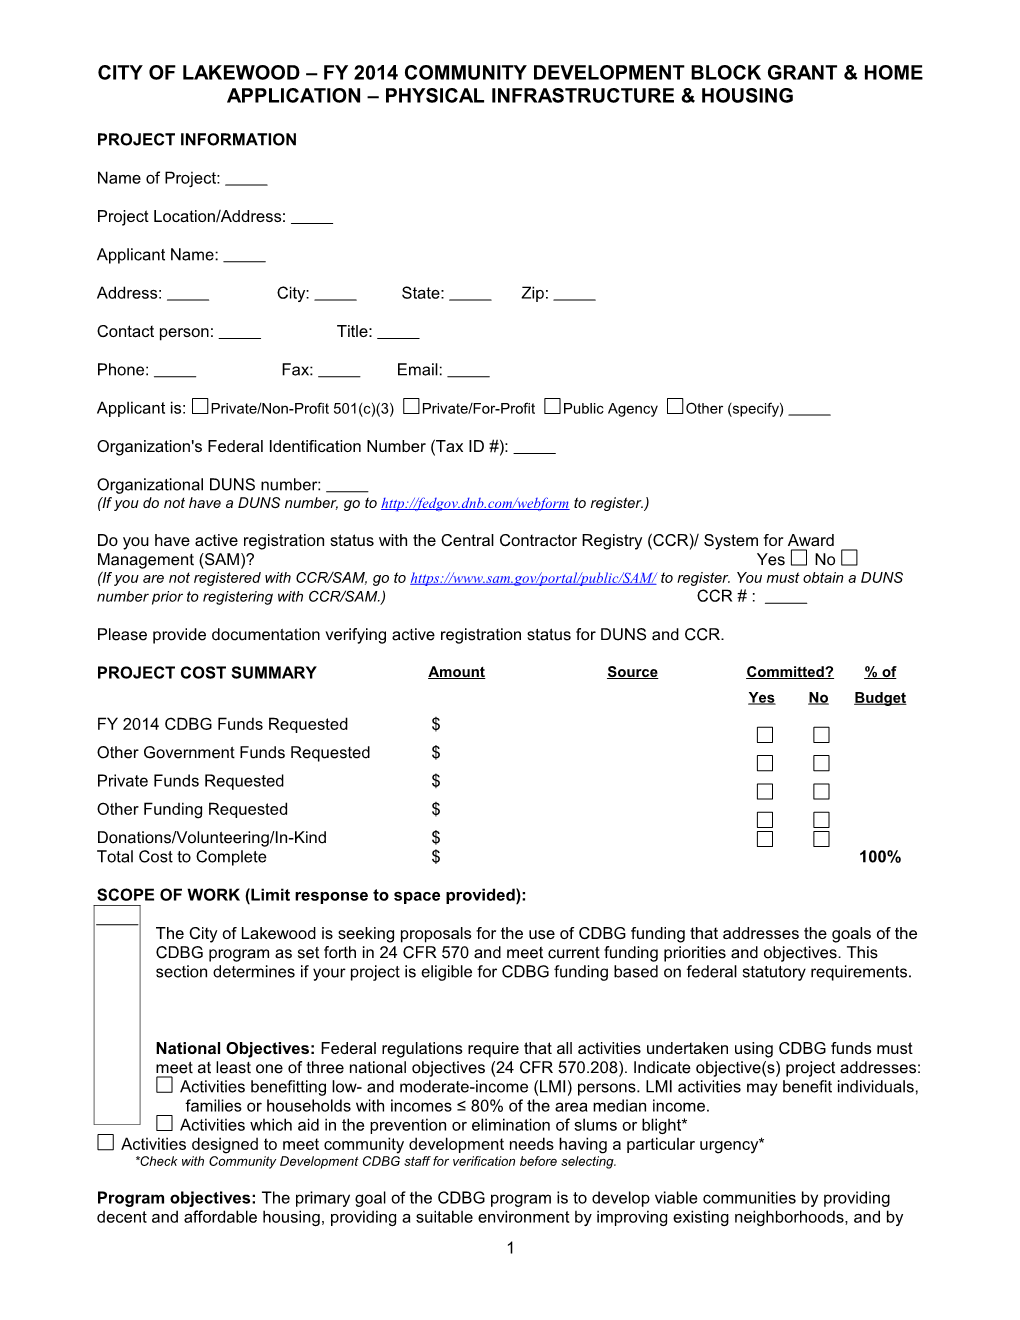 City of Lakewood Fy 2014 Community Development Block Grant & Home Application Physical